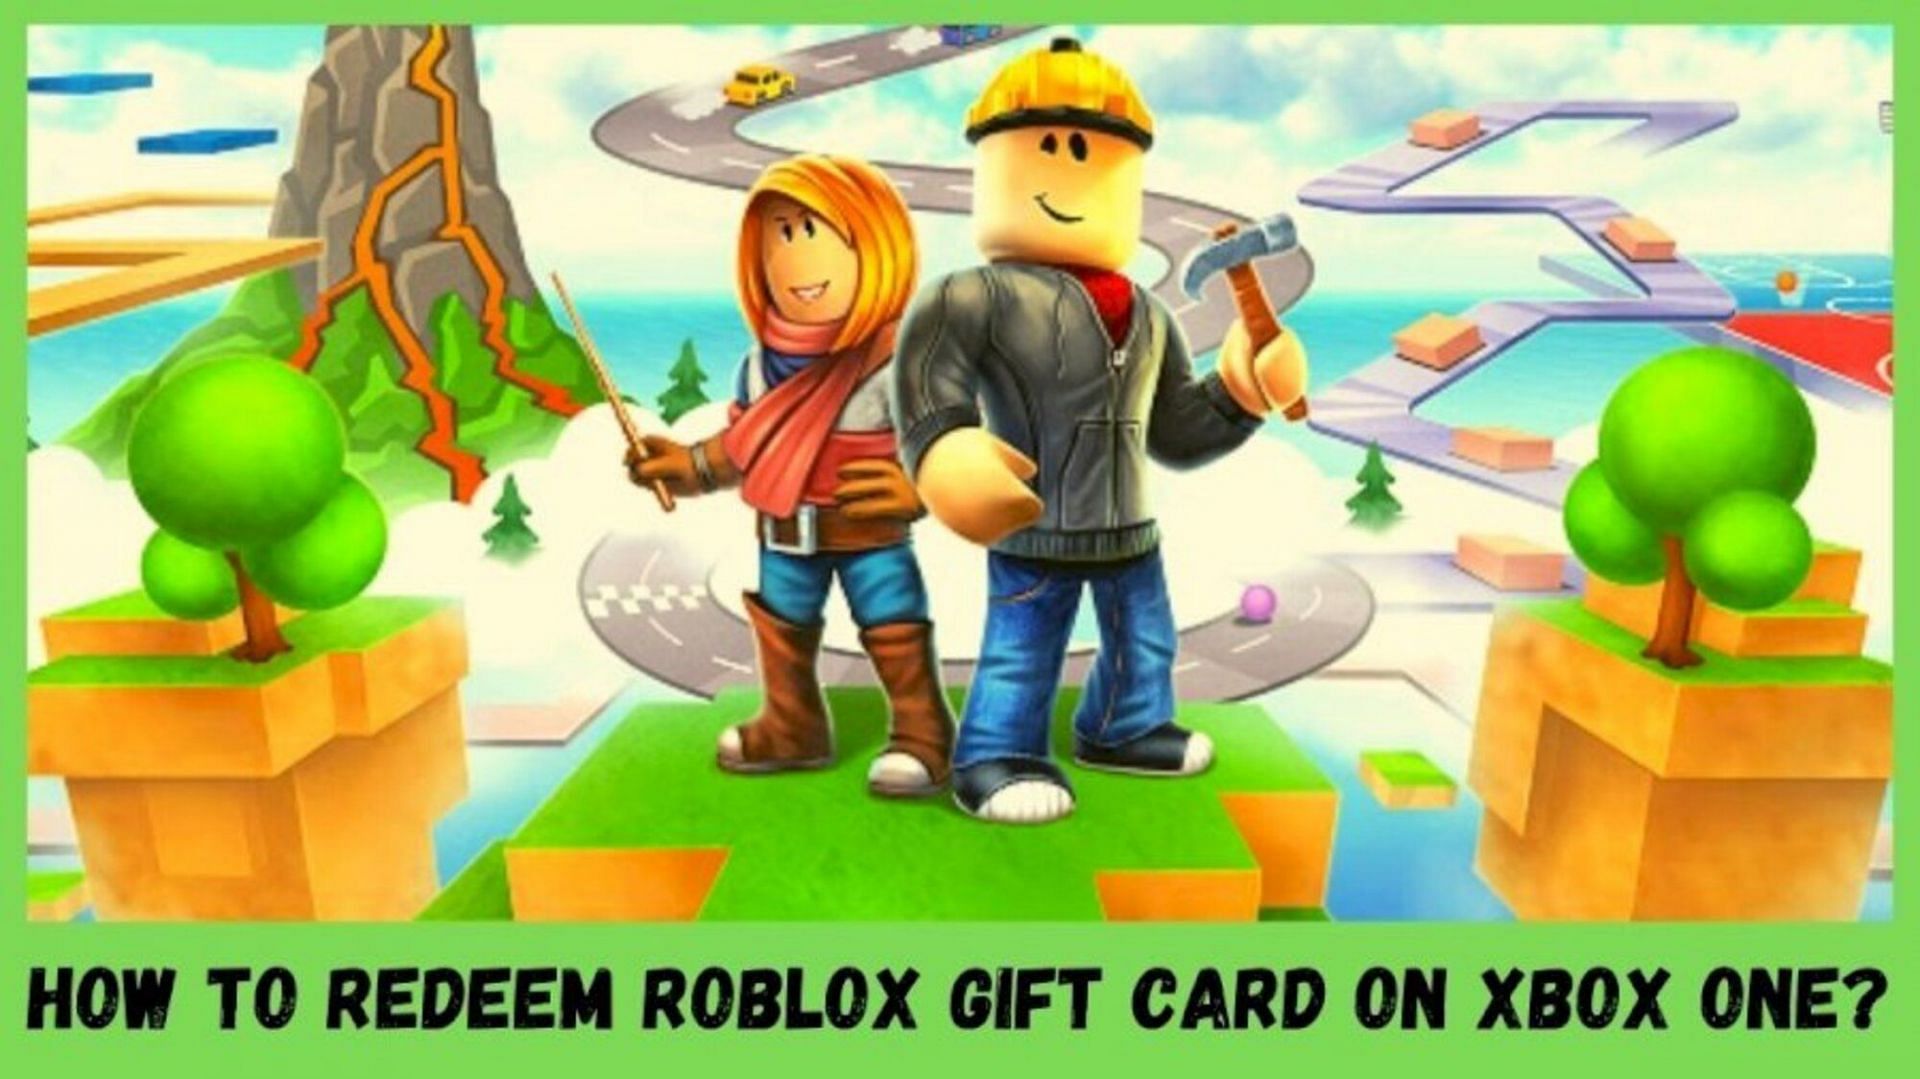 Ways to redeem Roblox gift cards on Xbox One (image via Roblox)